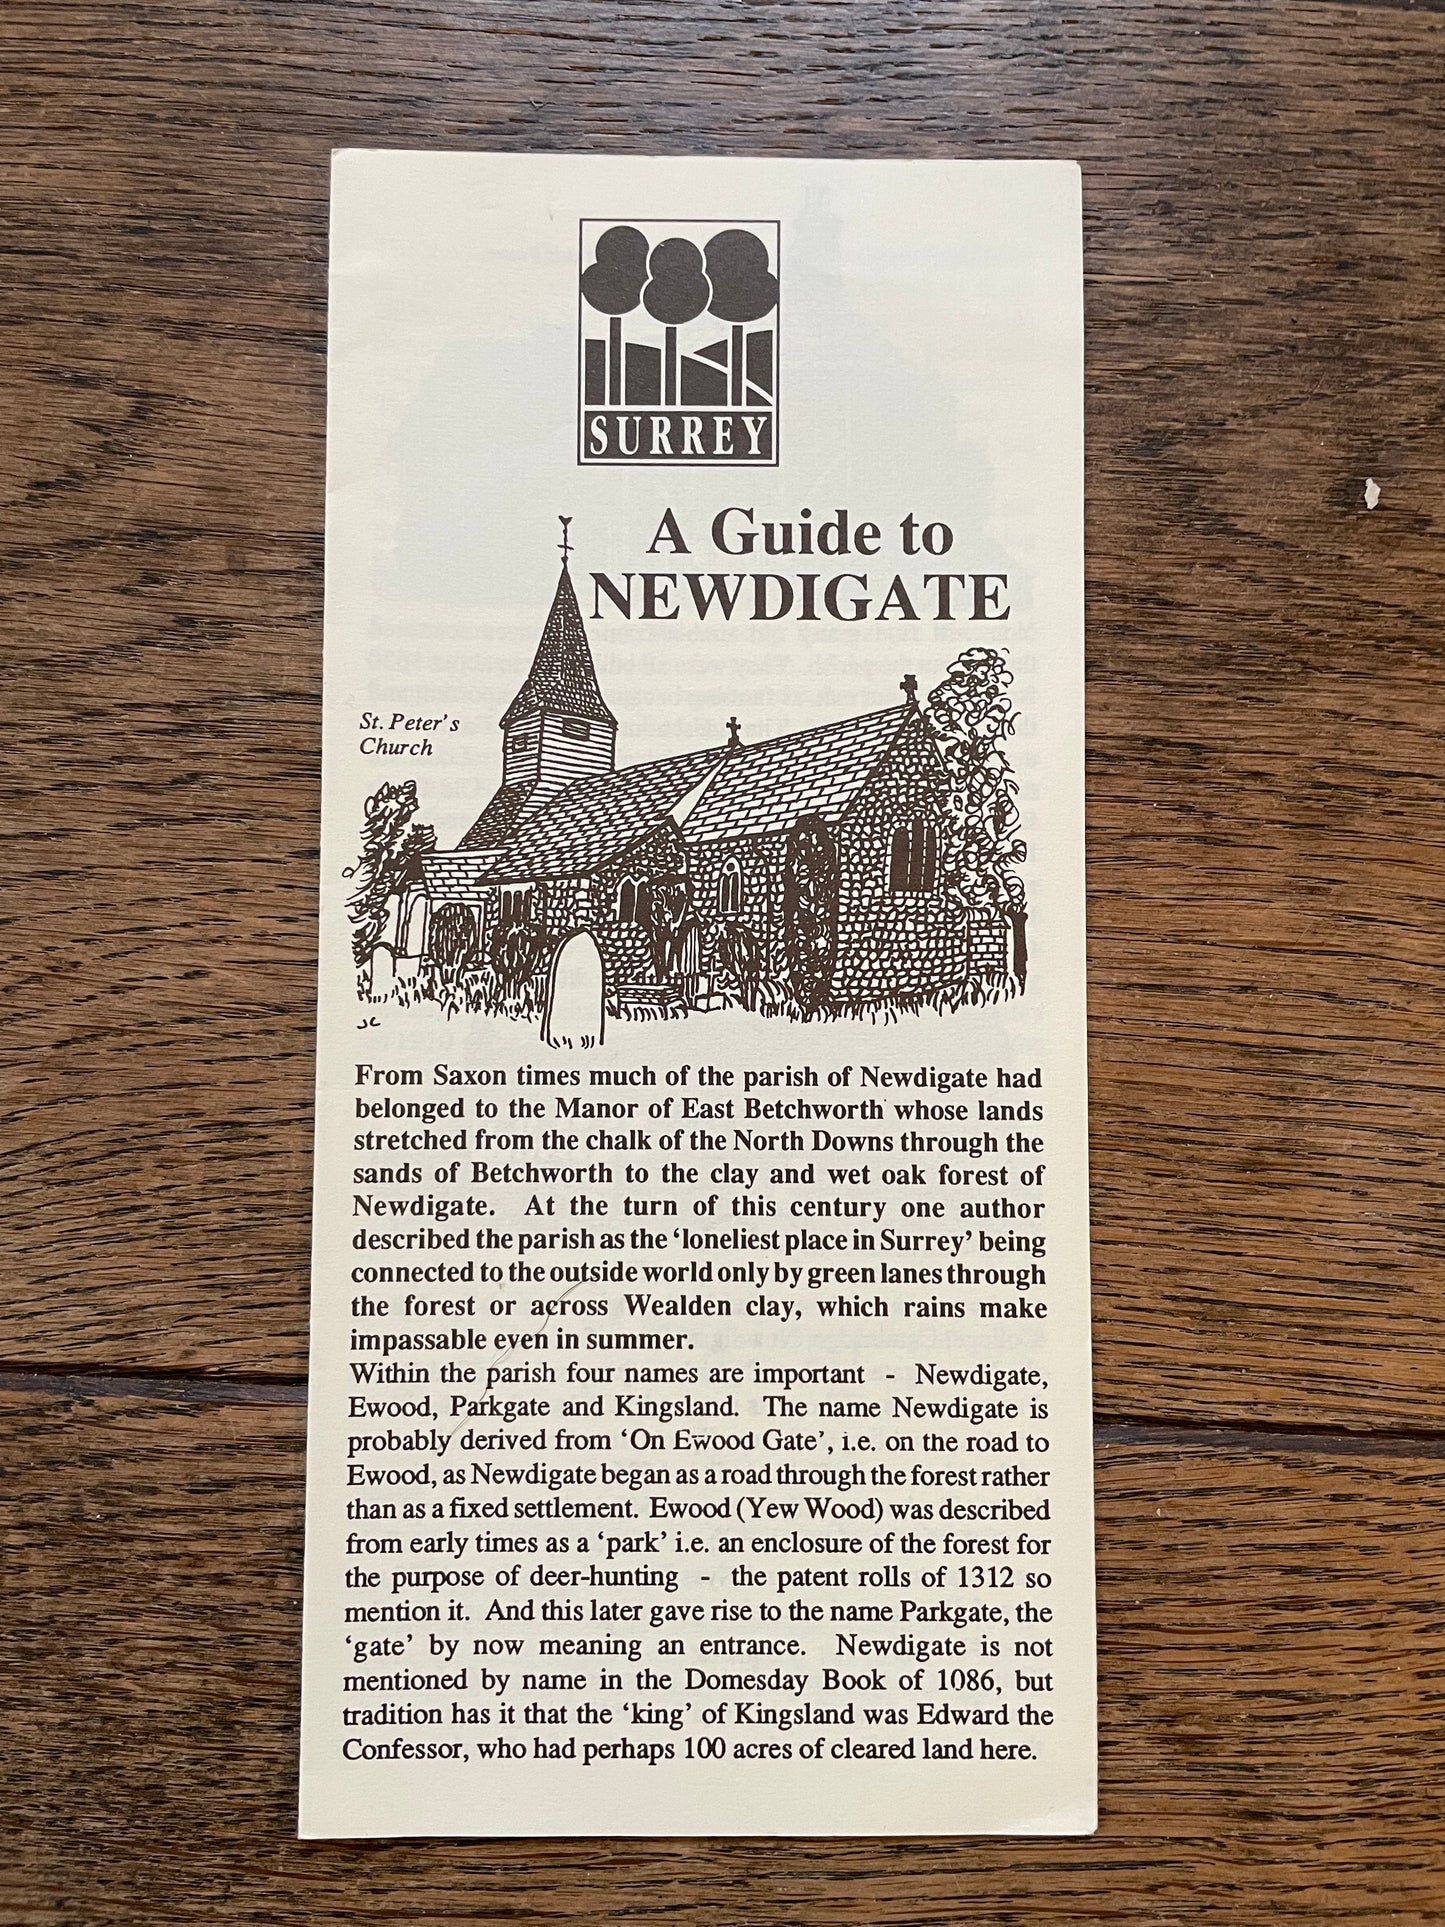 Guide to Newdigate & Guide to St. Peter's Church